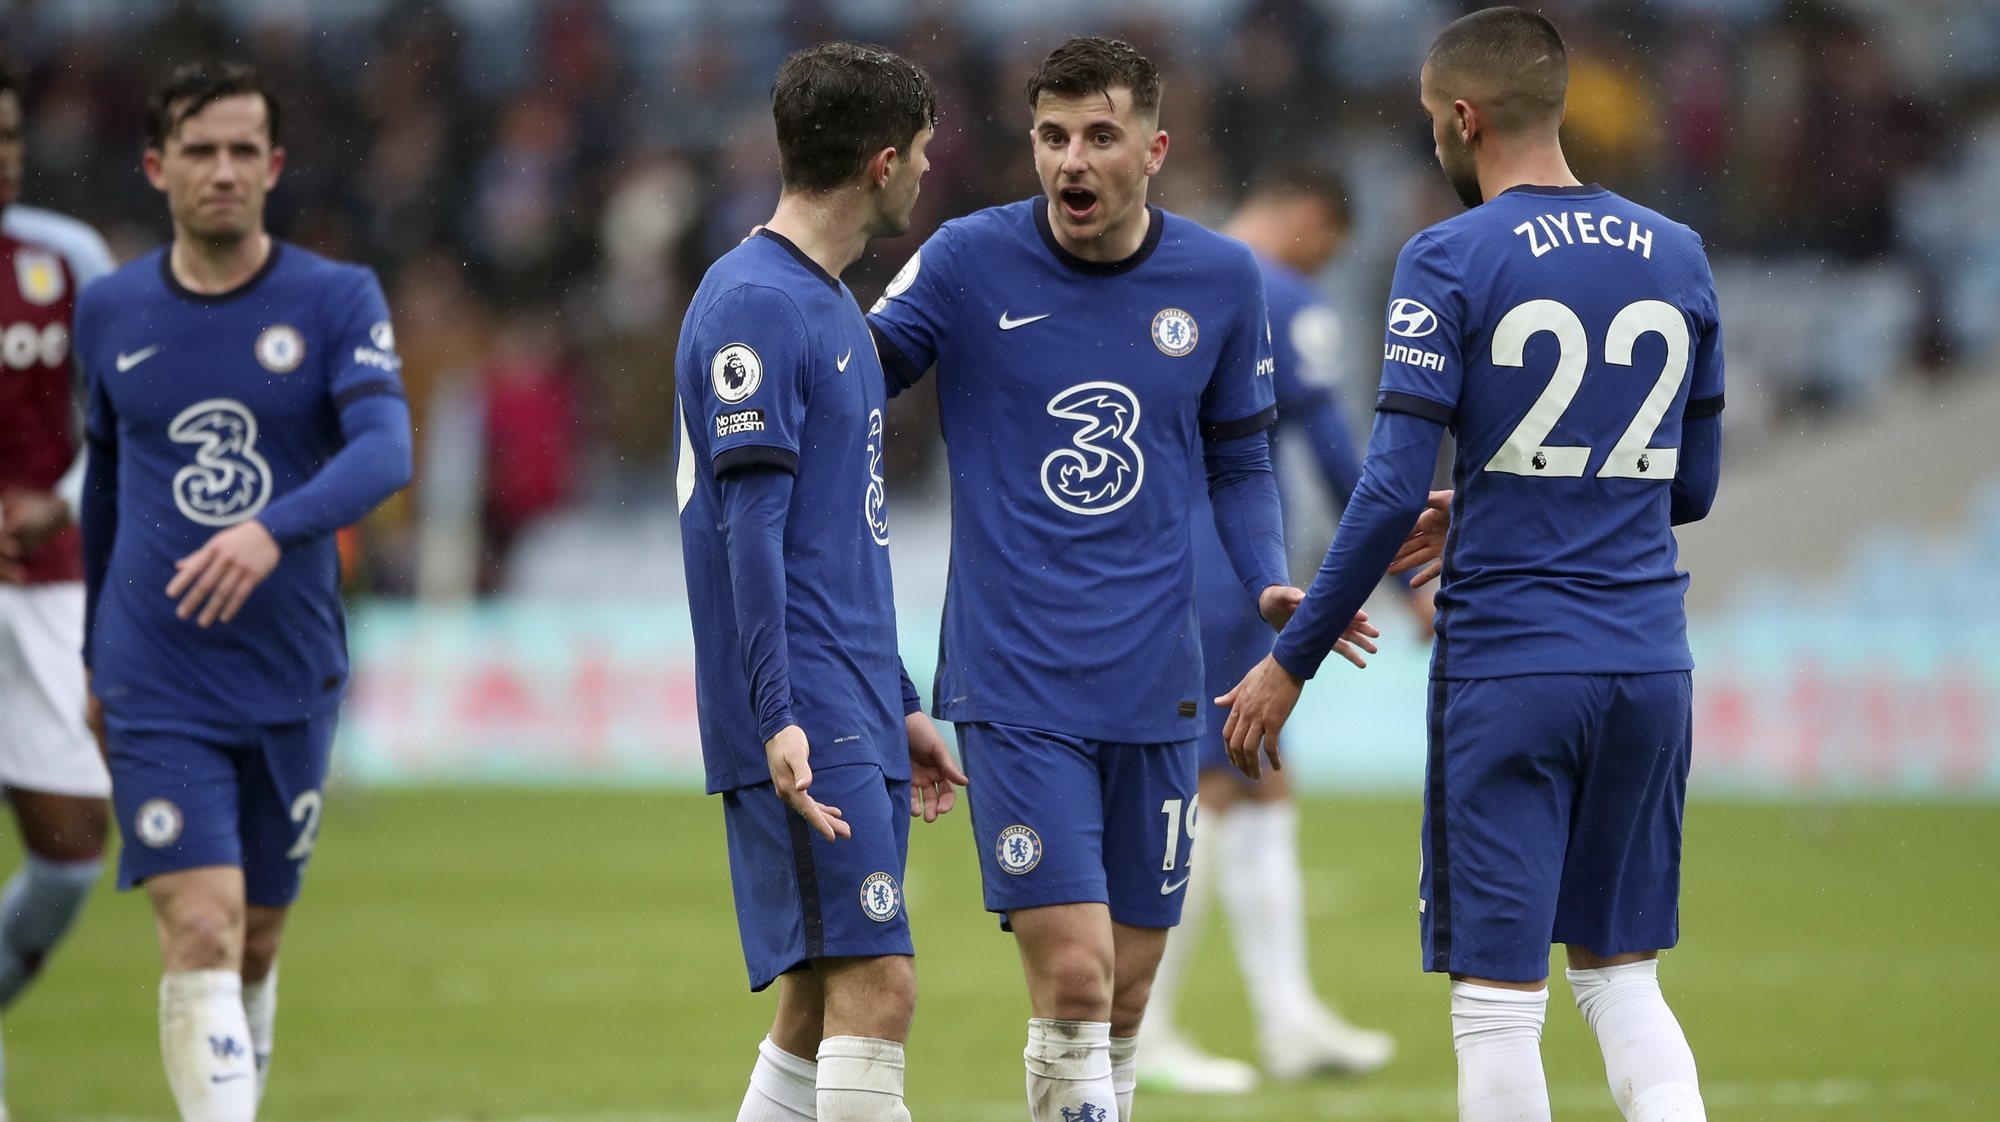 epa09223512 Mason Mount (2-R) of Chelsea talks with teammates after the English Premier League soccer match between Aston Villa and Chelsea FC in Birmingham, Britain, 23 May 2021.  EPA/Nick Potts / POOL EDITORIAL USE ONLY. No use with unauthorized audio, video, data, fixture lists, club/league logos or &#039;live&#039; services. Online in-match use limited to 120 images, no video emulation. No use in betting, games or single club/league/player publications.